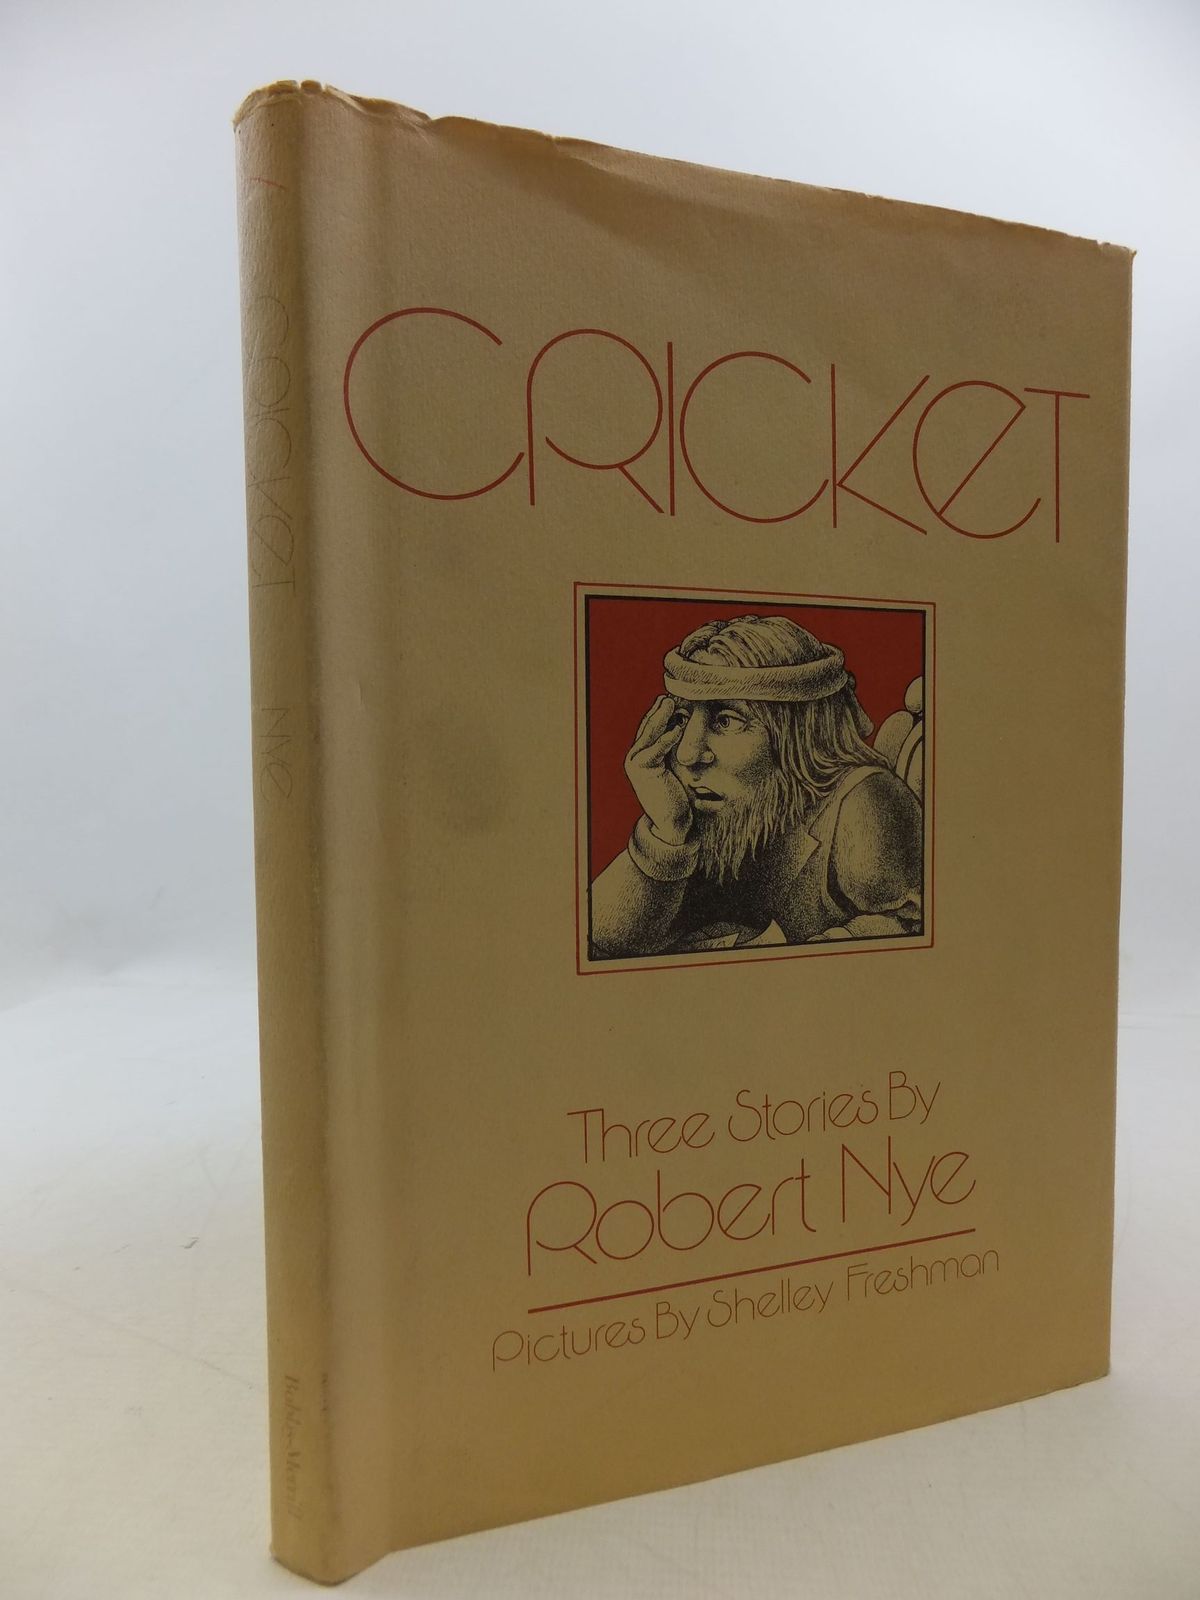 Photo of CRICKET written by Nye, Robert illustrated by Freshman, Shelley published by The Bobbs-Merrill Company Inc. (STOCK CODE: 1709897)  for sale by Stella & Rose's Books